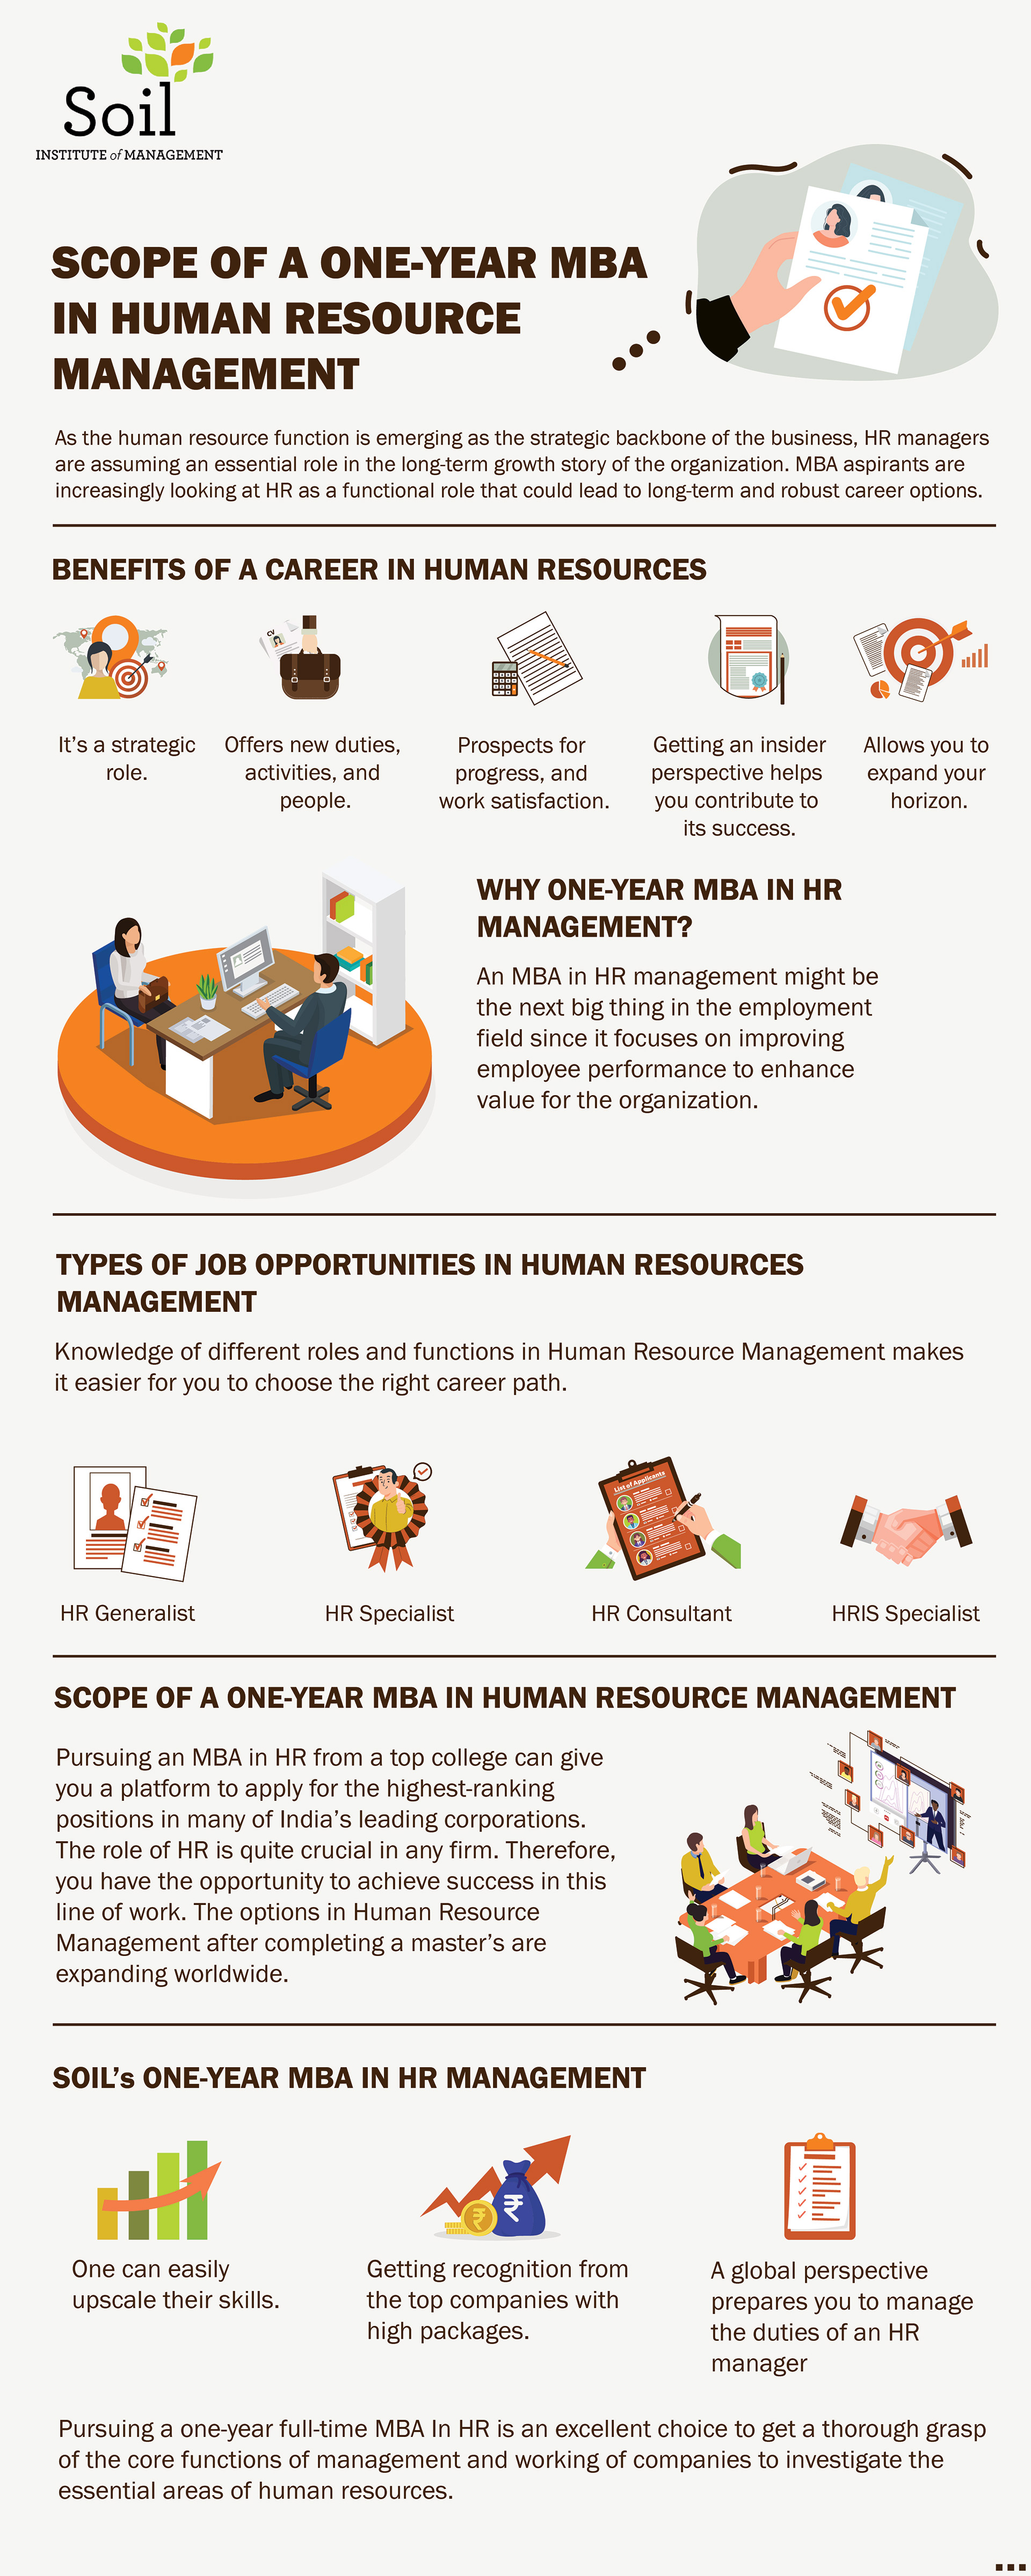 Scope of a one-year MBA in Human Resource Management